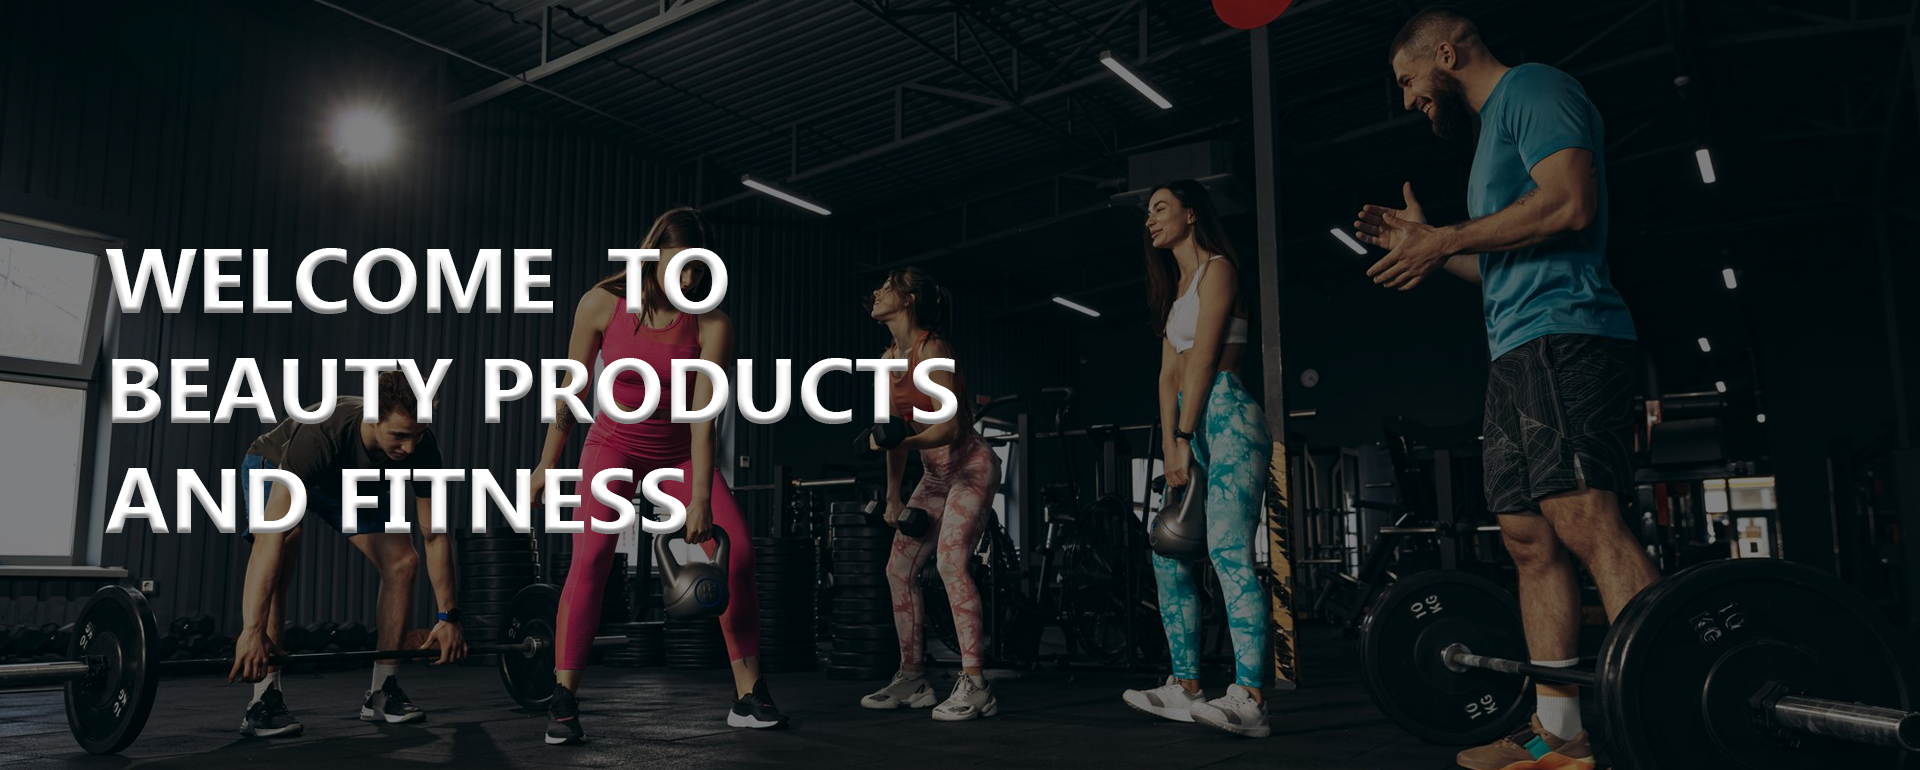 Beauty Products And Fitness banner carousel image